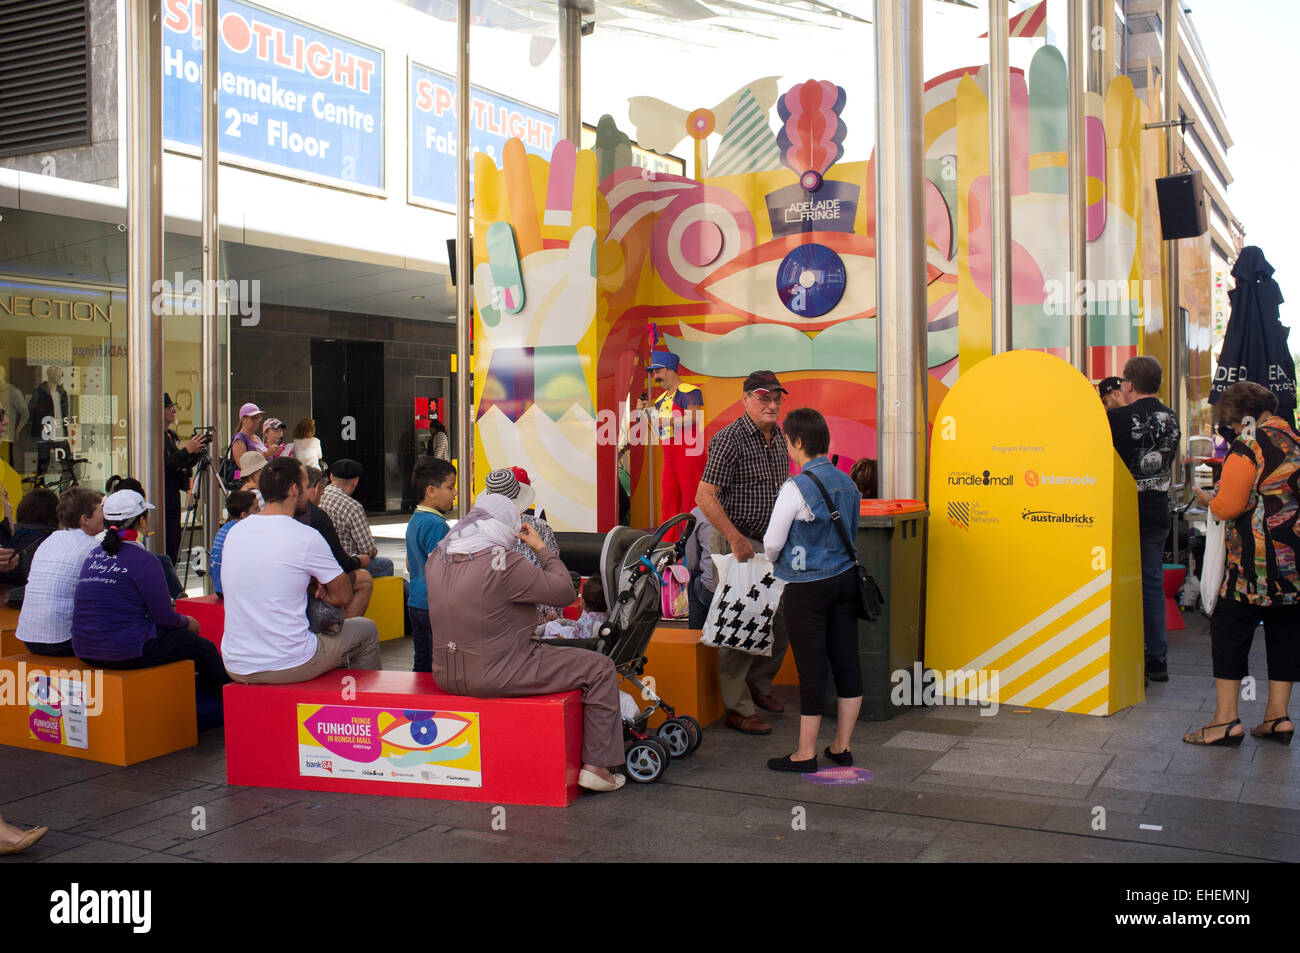 Adelaide Australia. 13th March 2015. The Adelaide fringe festival which is held in february and march is the largest arts festival in the Southern Hemisphere hosted in the city of Adelaide featuring more than 4000 artists from around Australia and the world Credit:  amer ghazzal/Alamy Live News Stock Photo